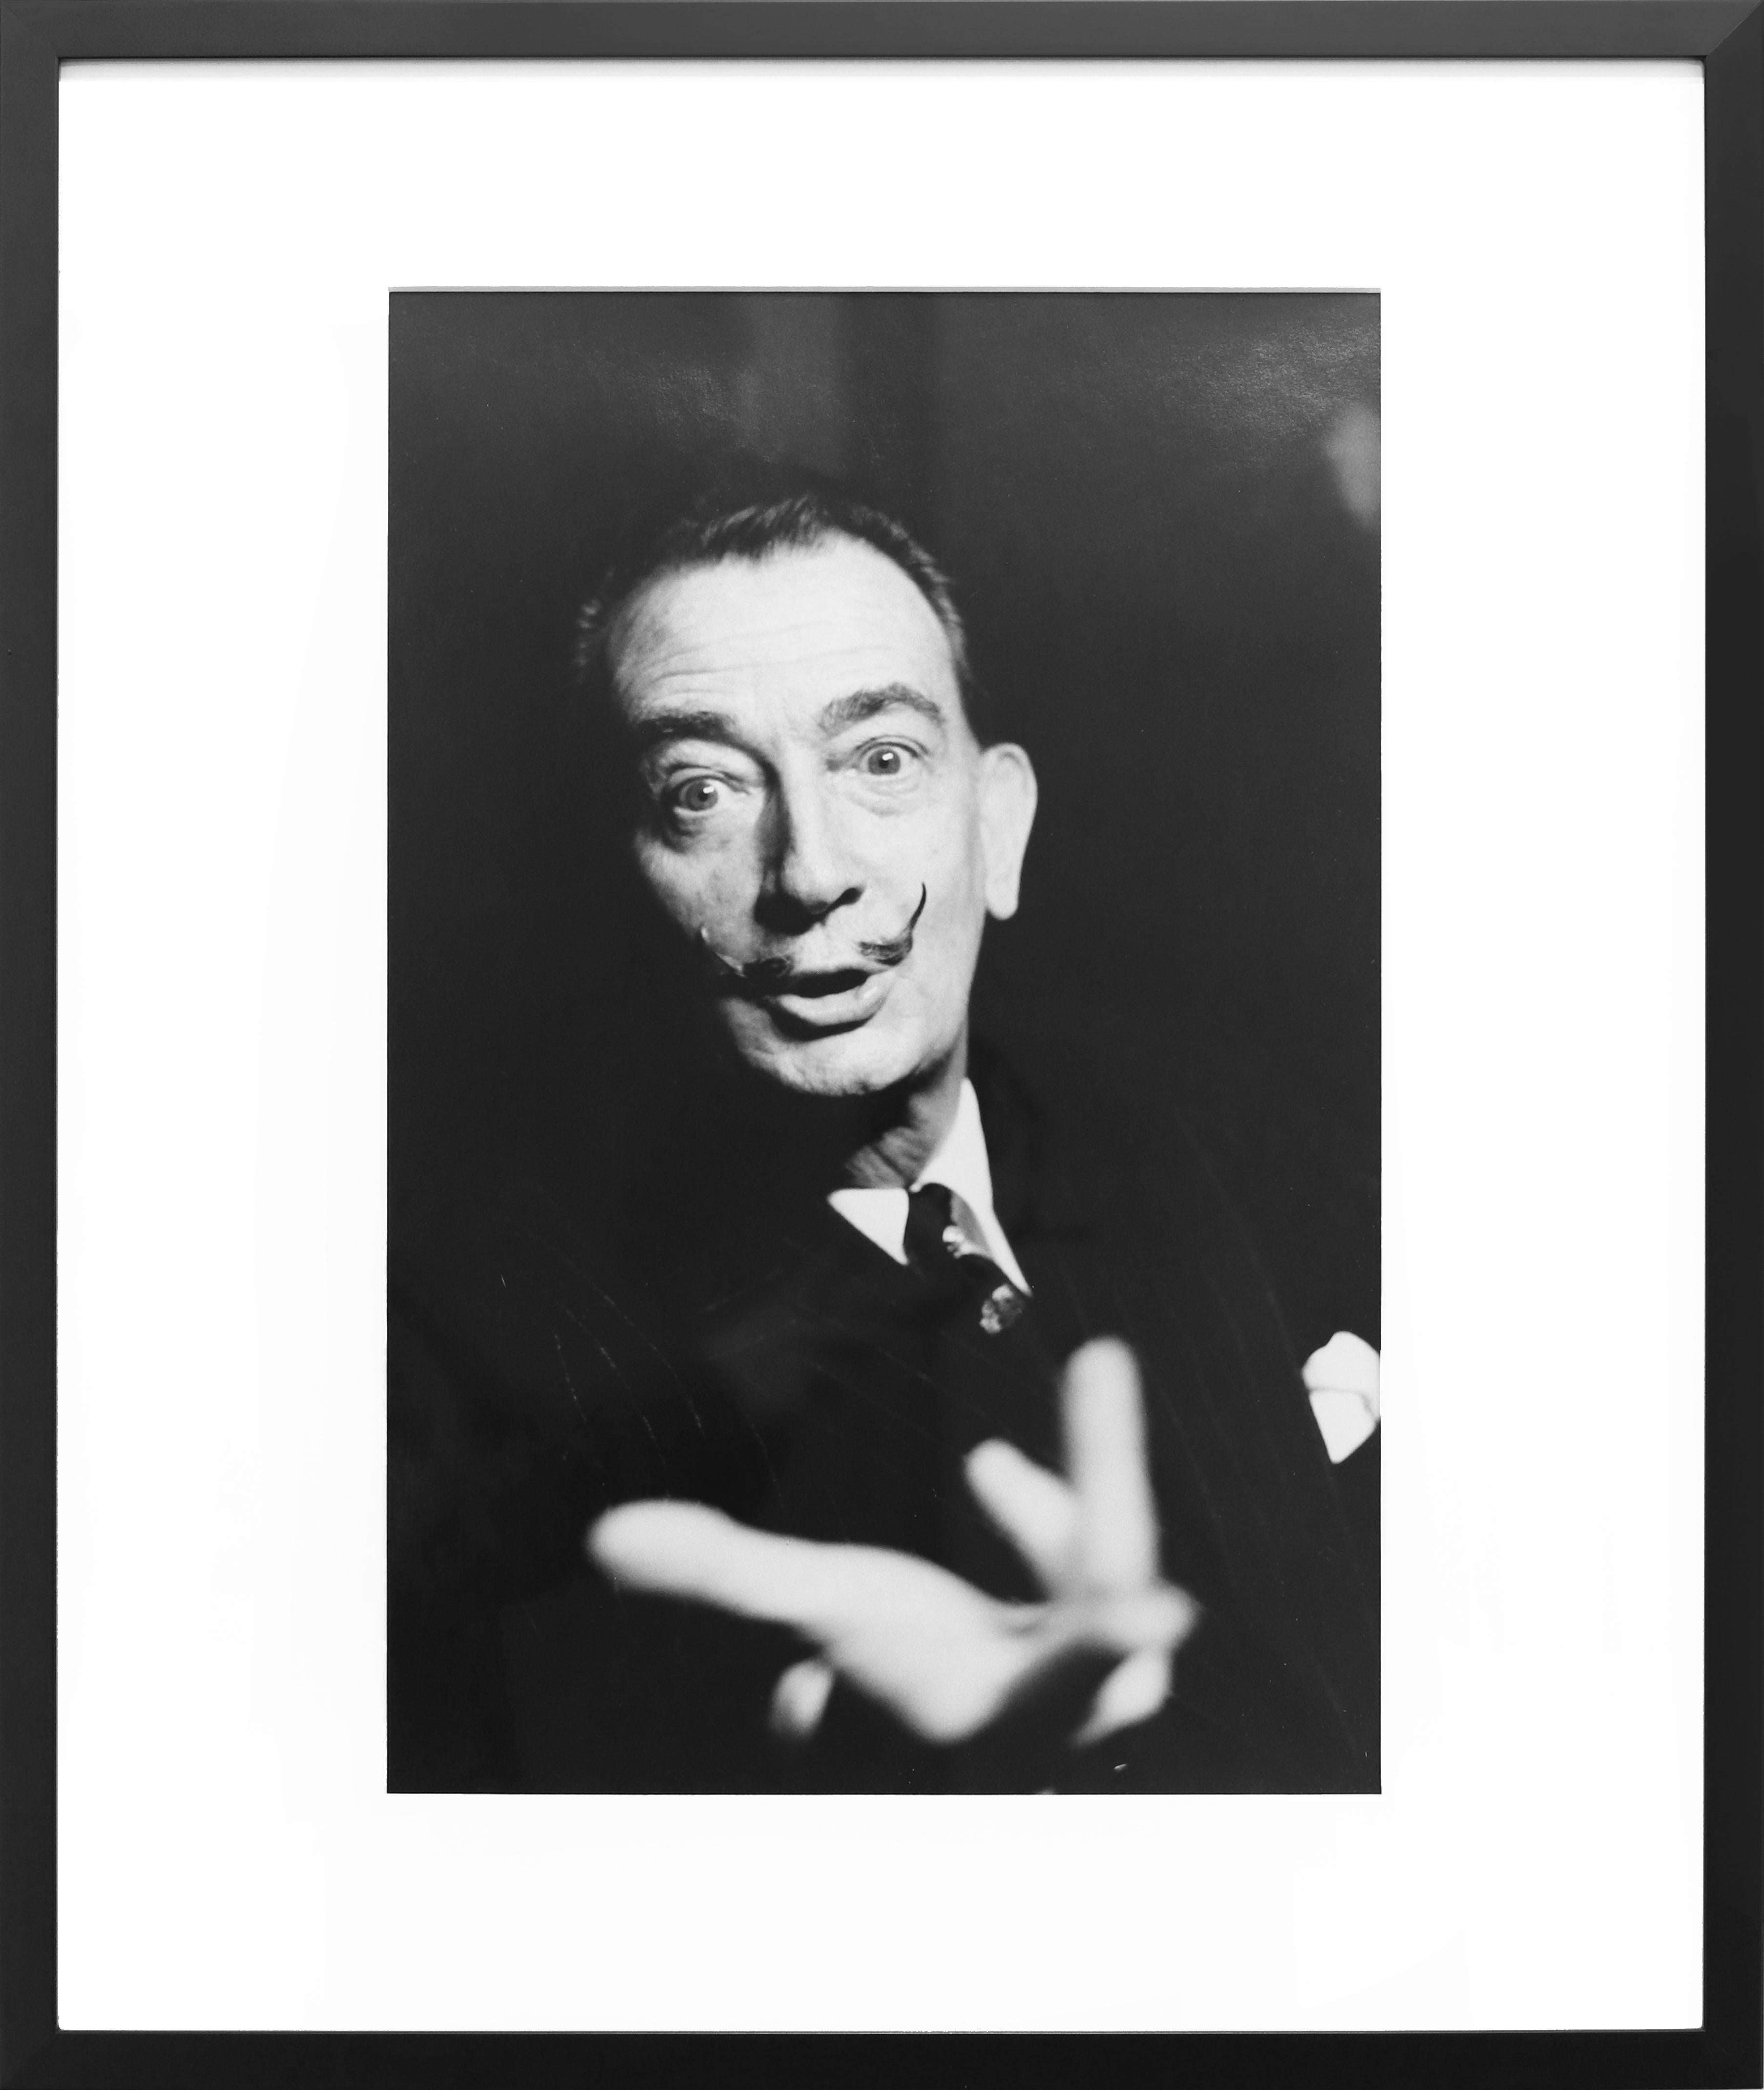 This Signed Limited Edition Silver Gelatin Photograph was authorized by the Ben Martin Estate. Ben Martin was TIME Magazine’s first New York Bureau staff photographer covering wars, fashion, politics, arts, business, and sports for TIME, Life,